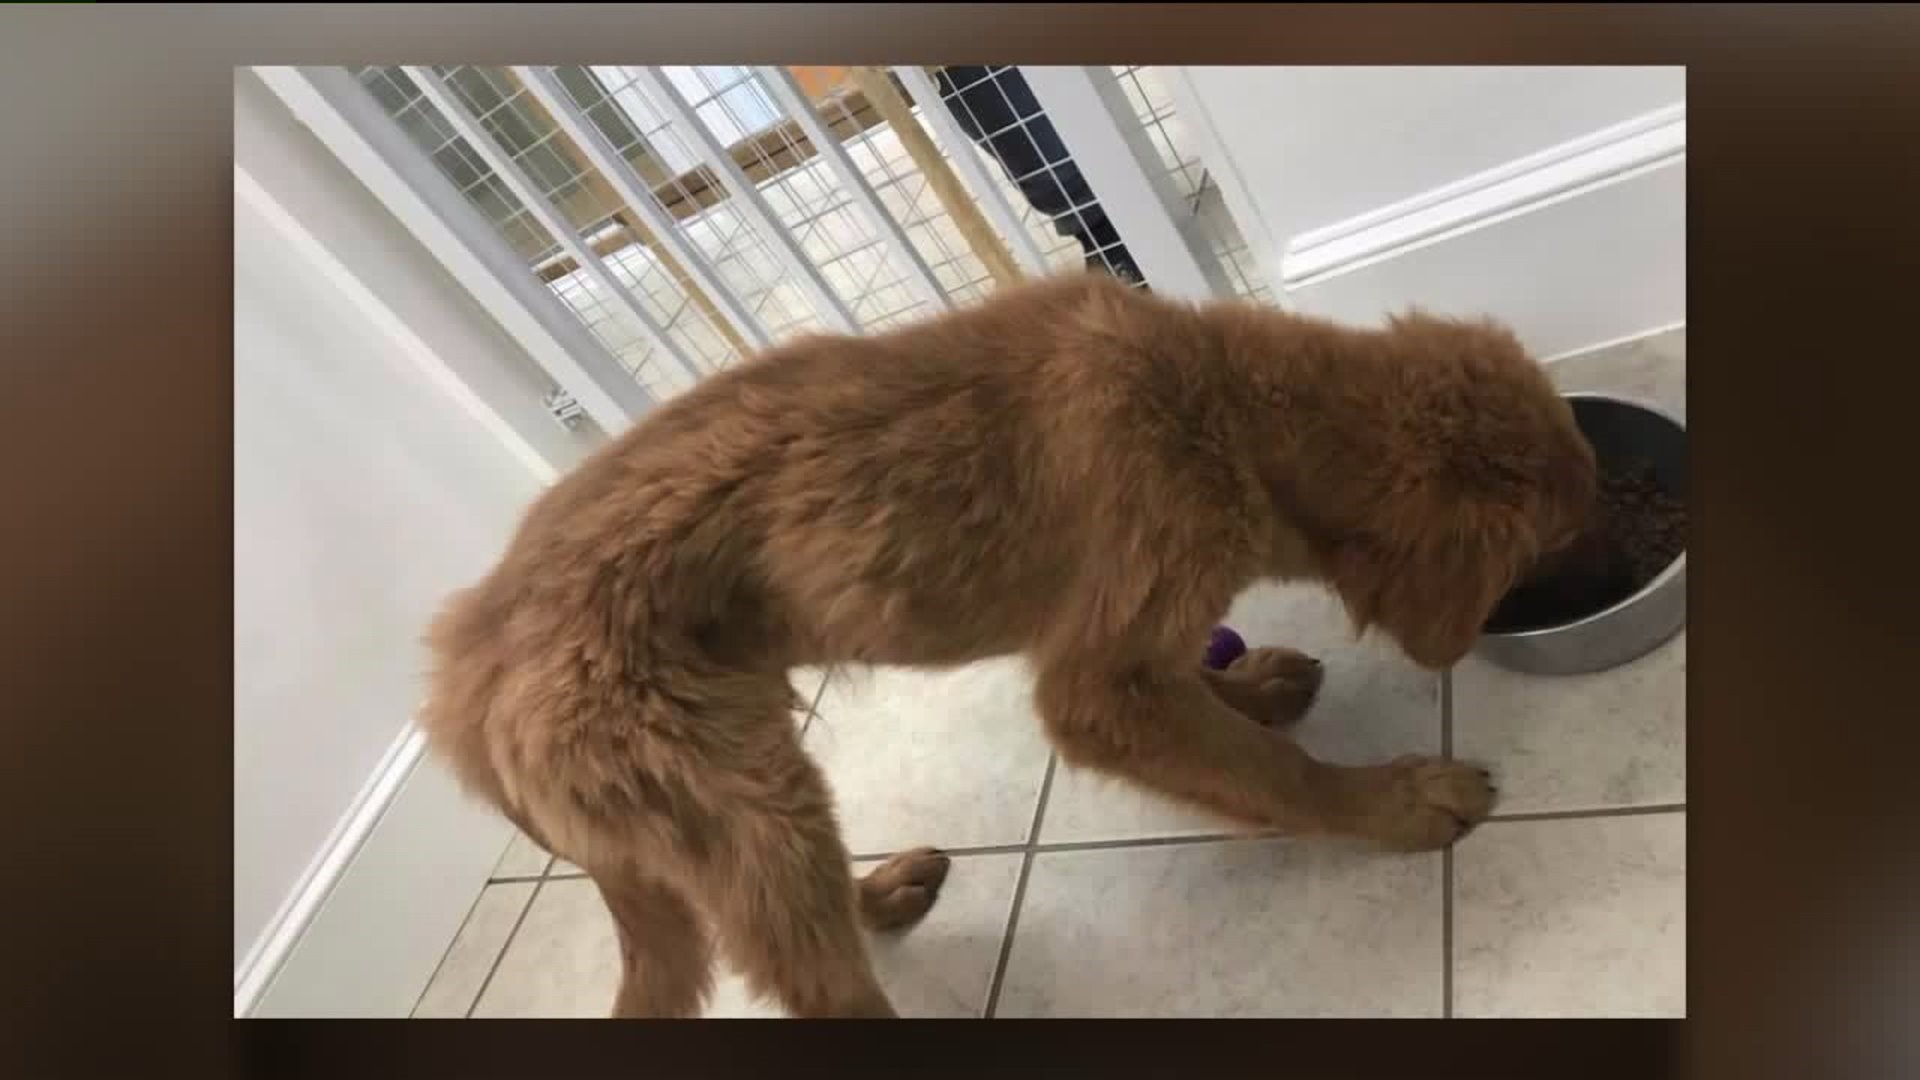 Puppy Boutique Under Investigation After Pictures Posted on Social Media